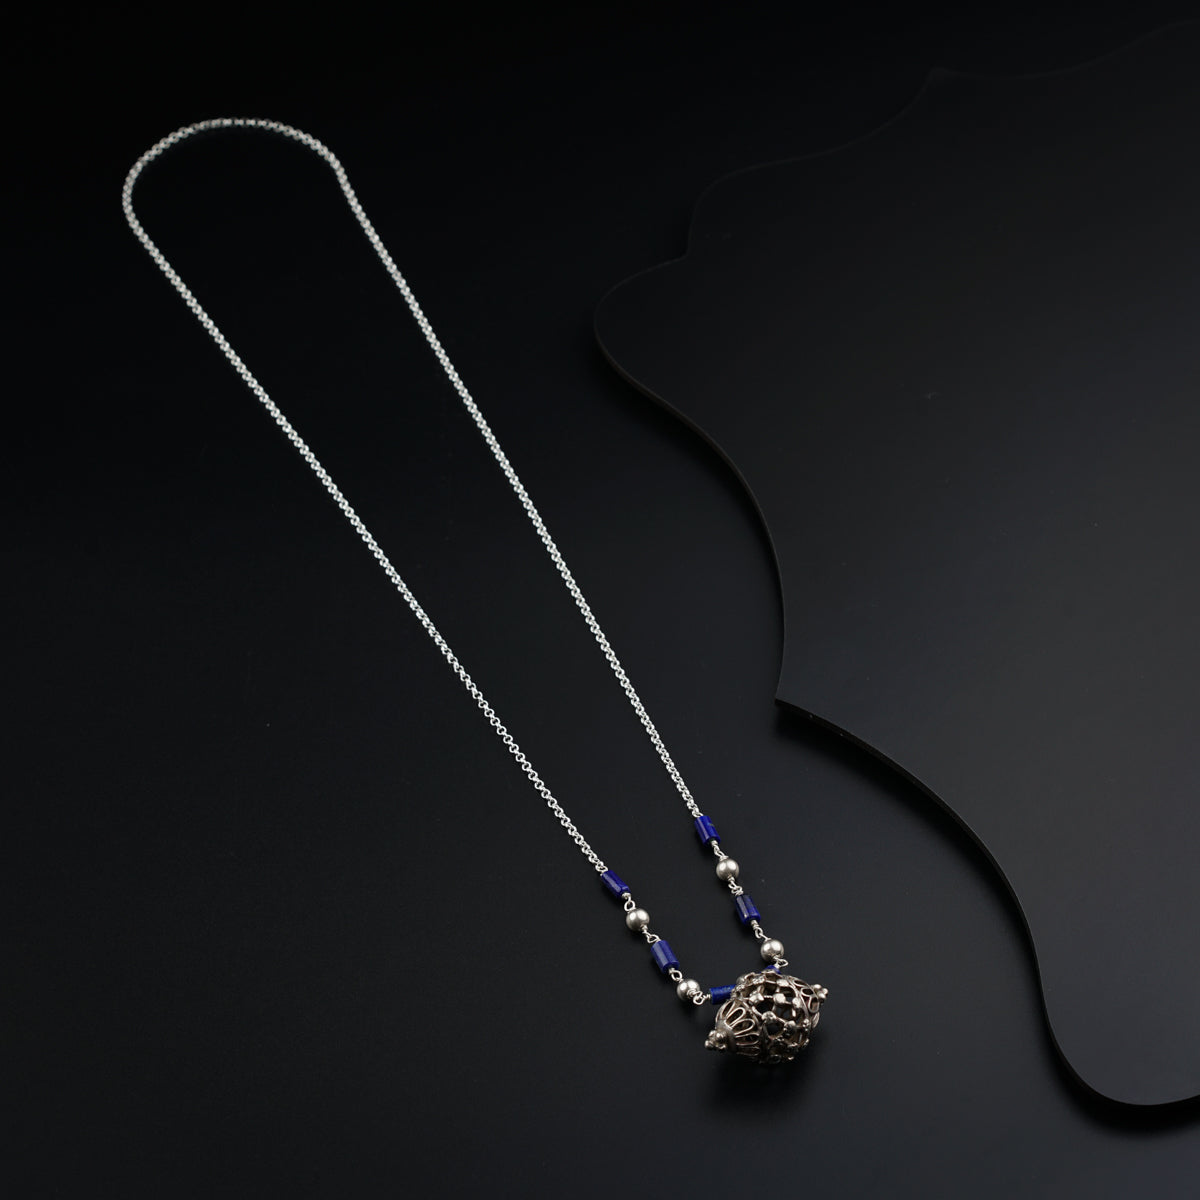 a silver necklace with a blue bead hanging from it